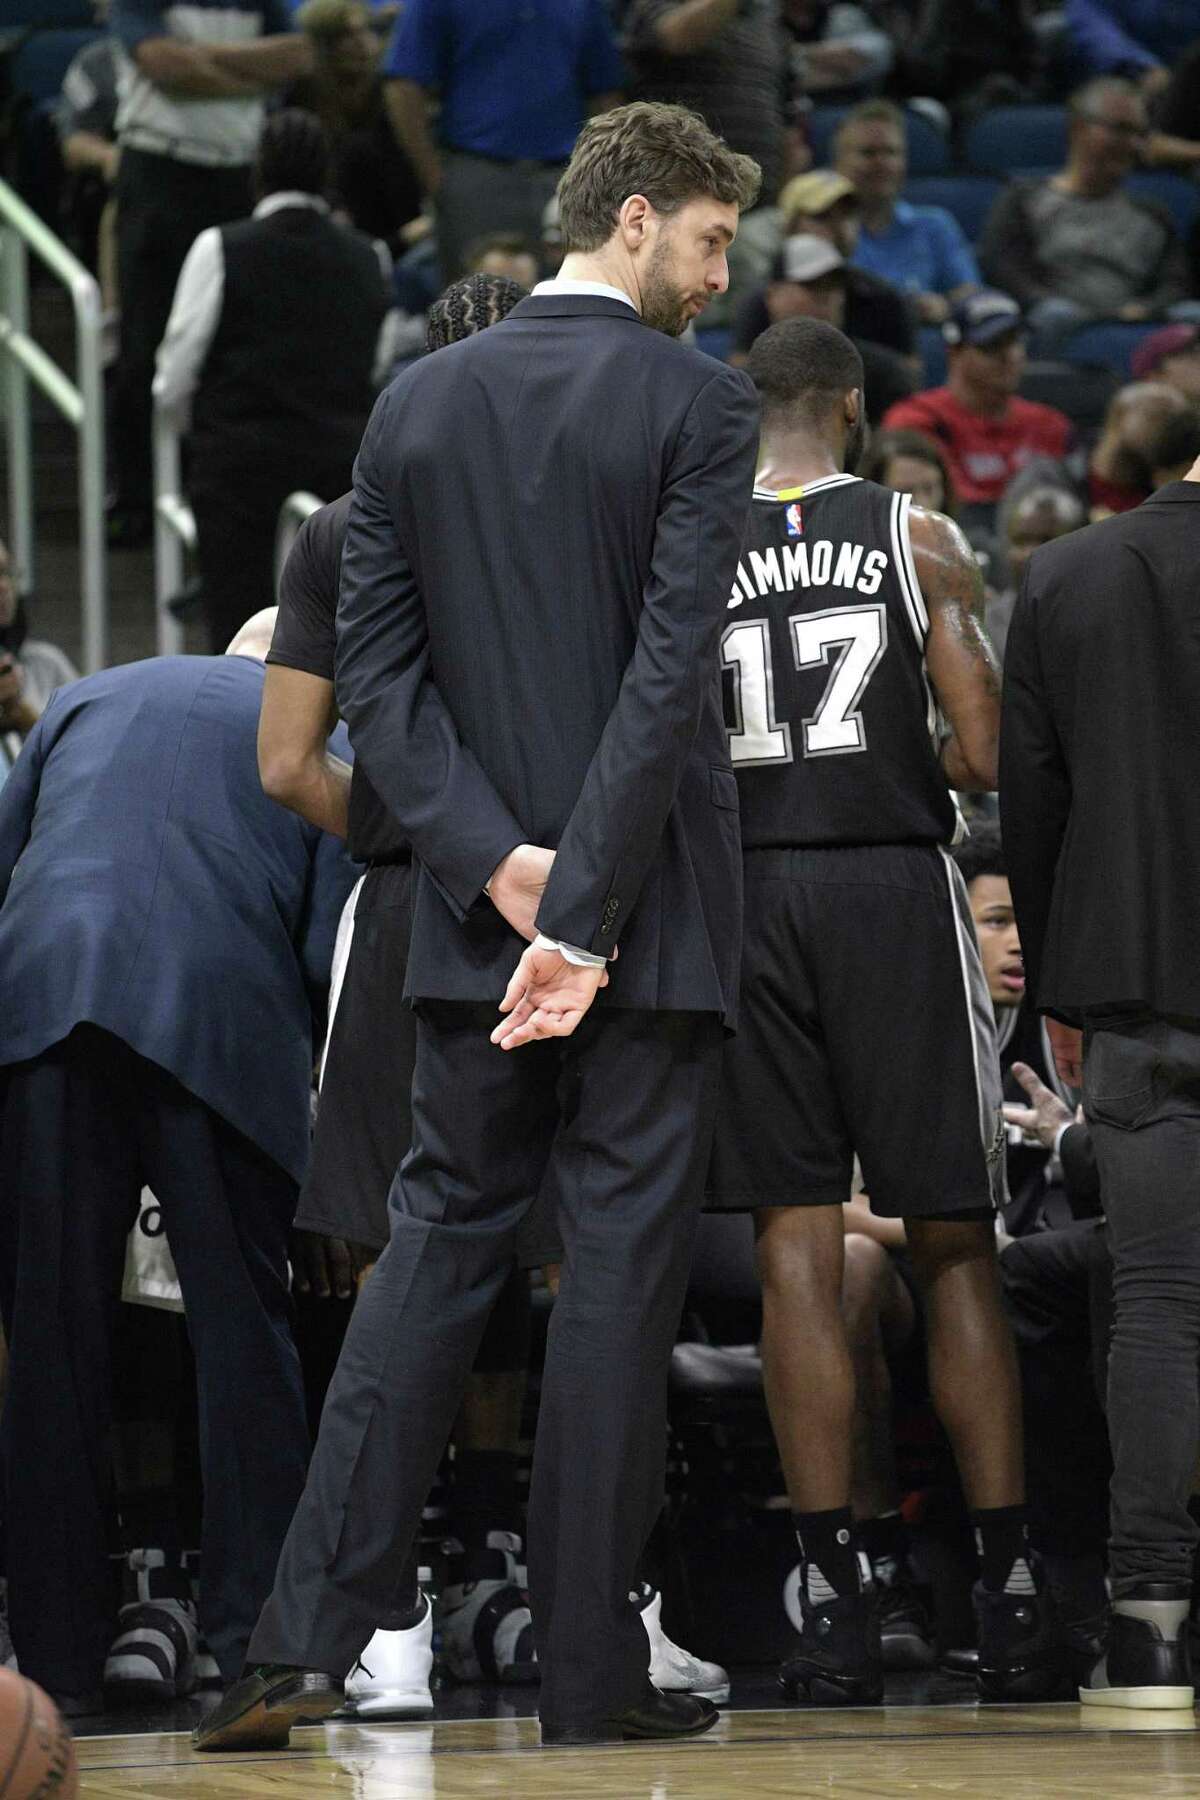 San Antonio Spurs center Pau Gasol stands outside a huddle during a timeout in the second half of an NBA basketball game against the Orlando Magic in Orlando, Fla., Wednesday, Feb. 15, 2017. The Spurs won 107-79. (AP Photo/Phelan M. Ebenhack)